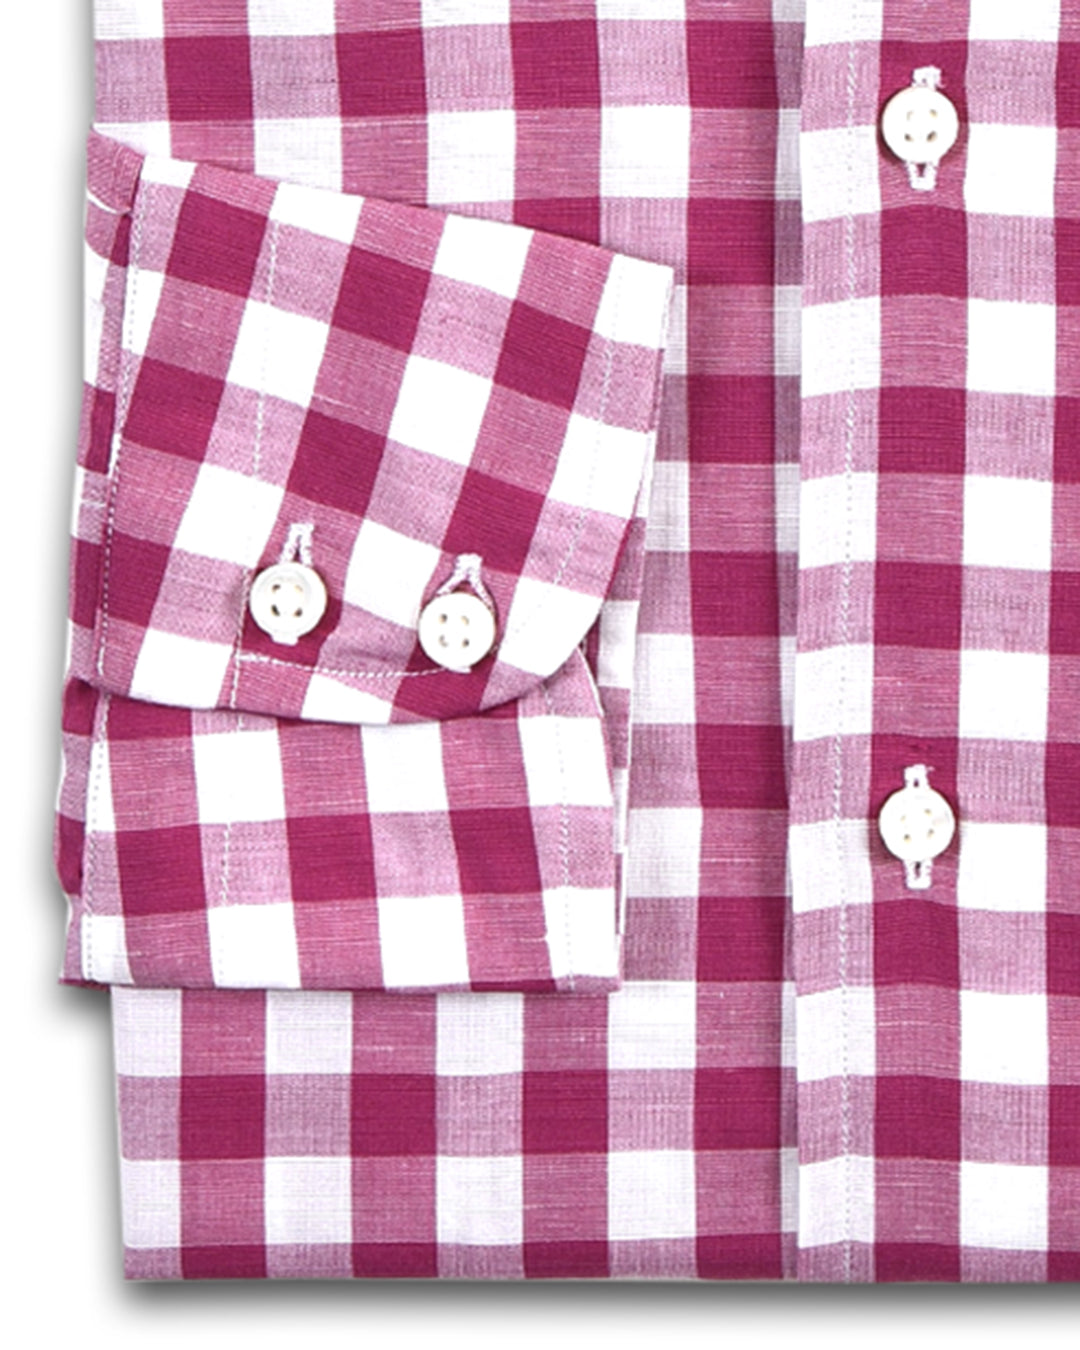 Cuff of custom linen shirt for men by Luxire in pink and white gingham